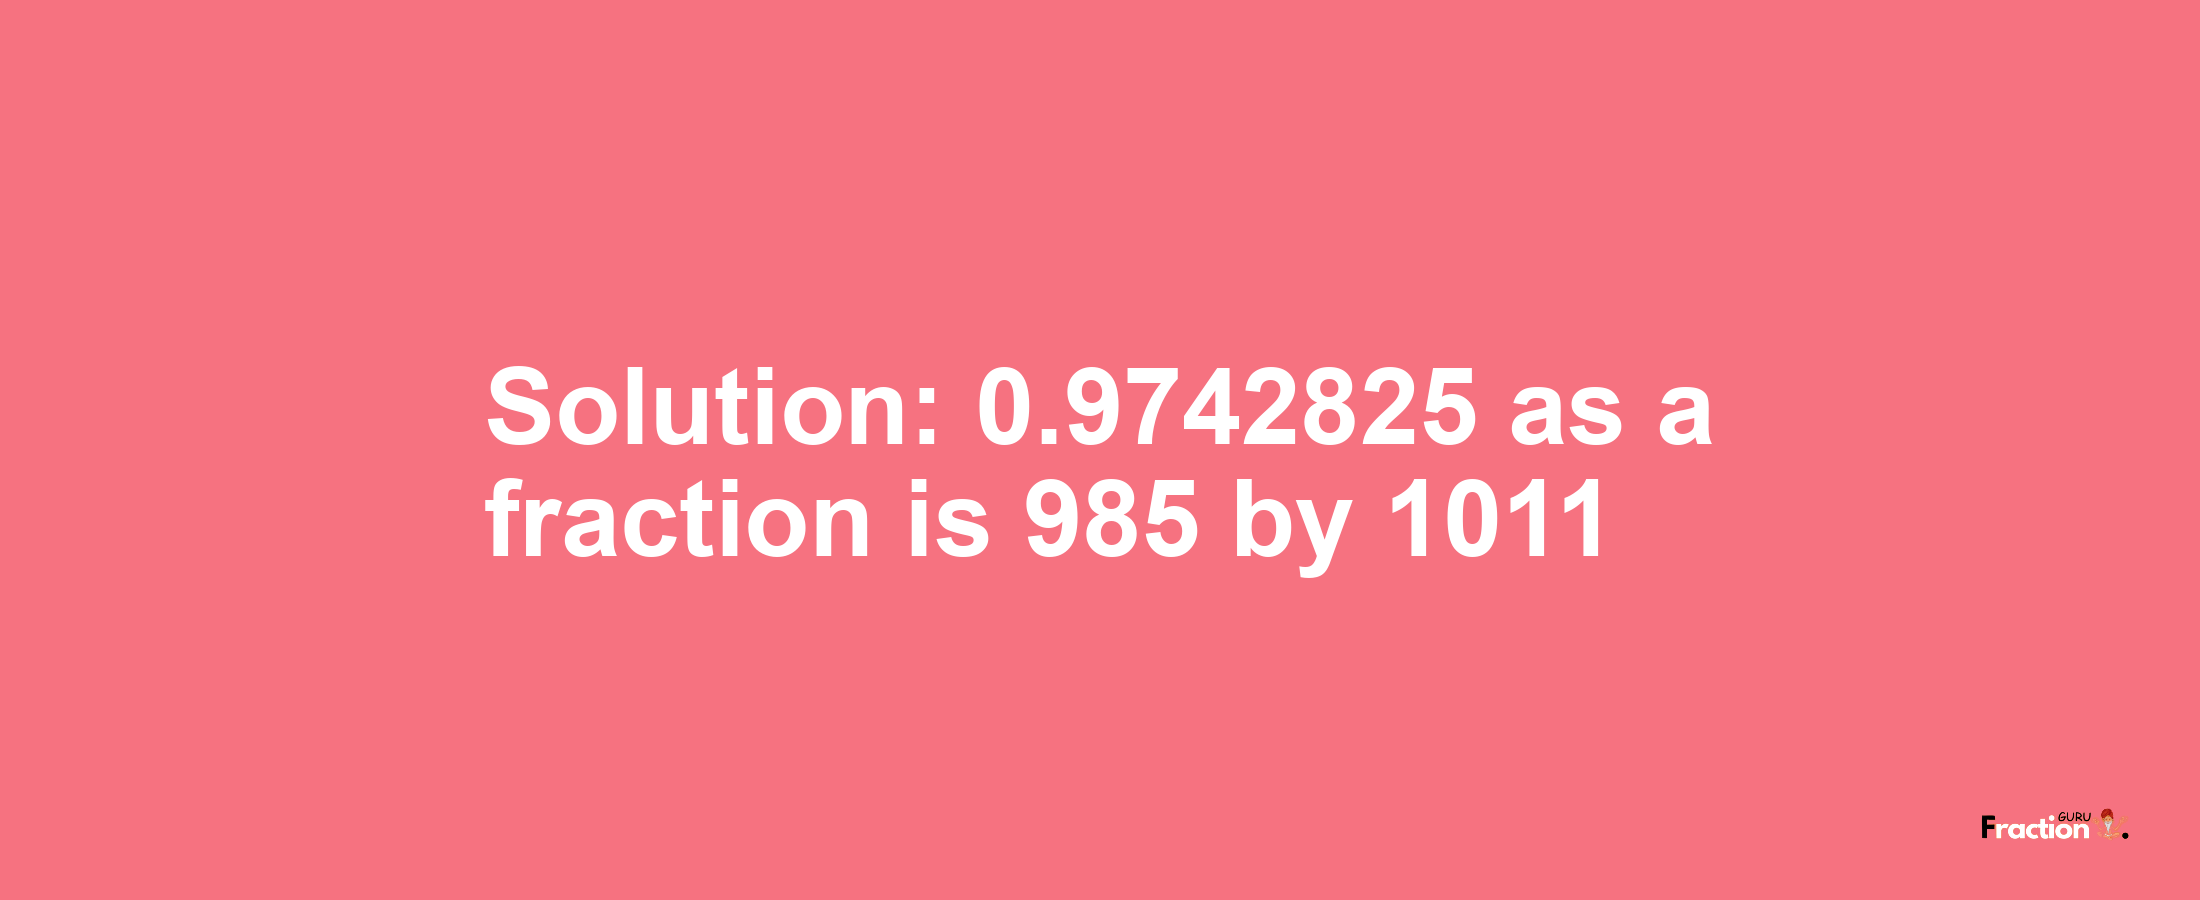 Solution:0.9742825 as a fraction is 985/1011